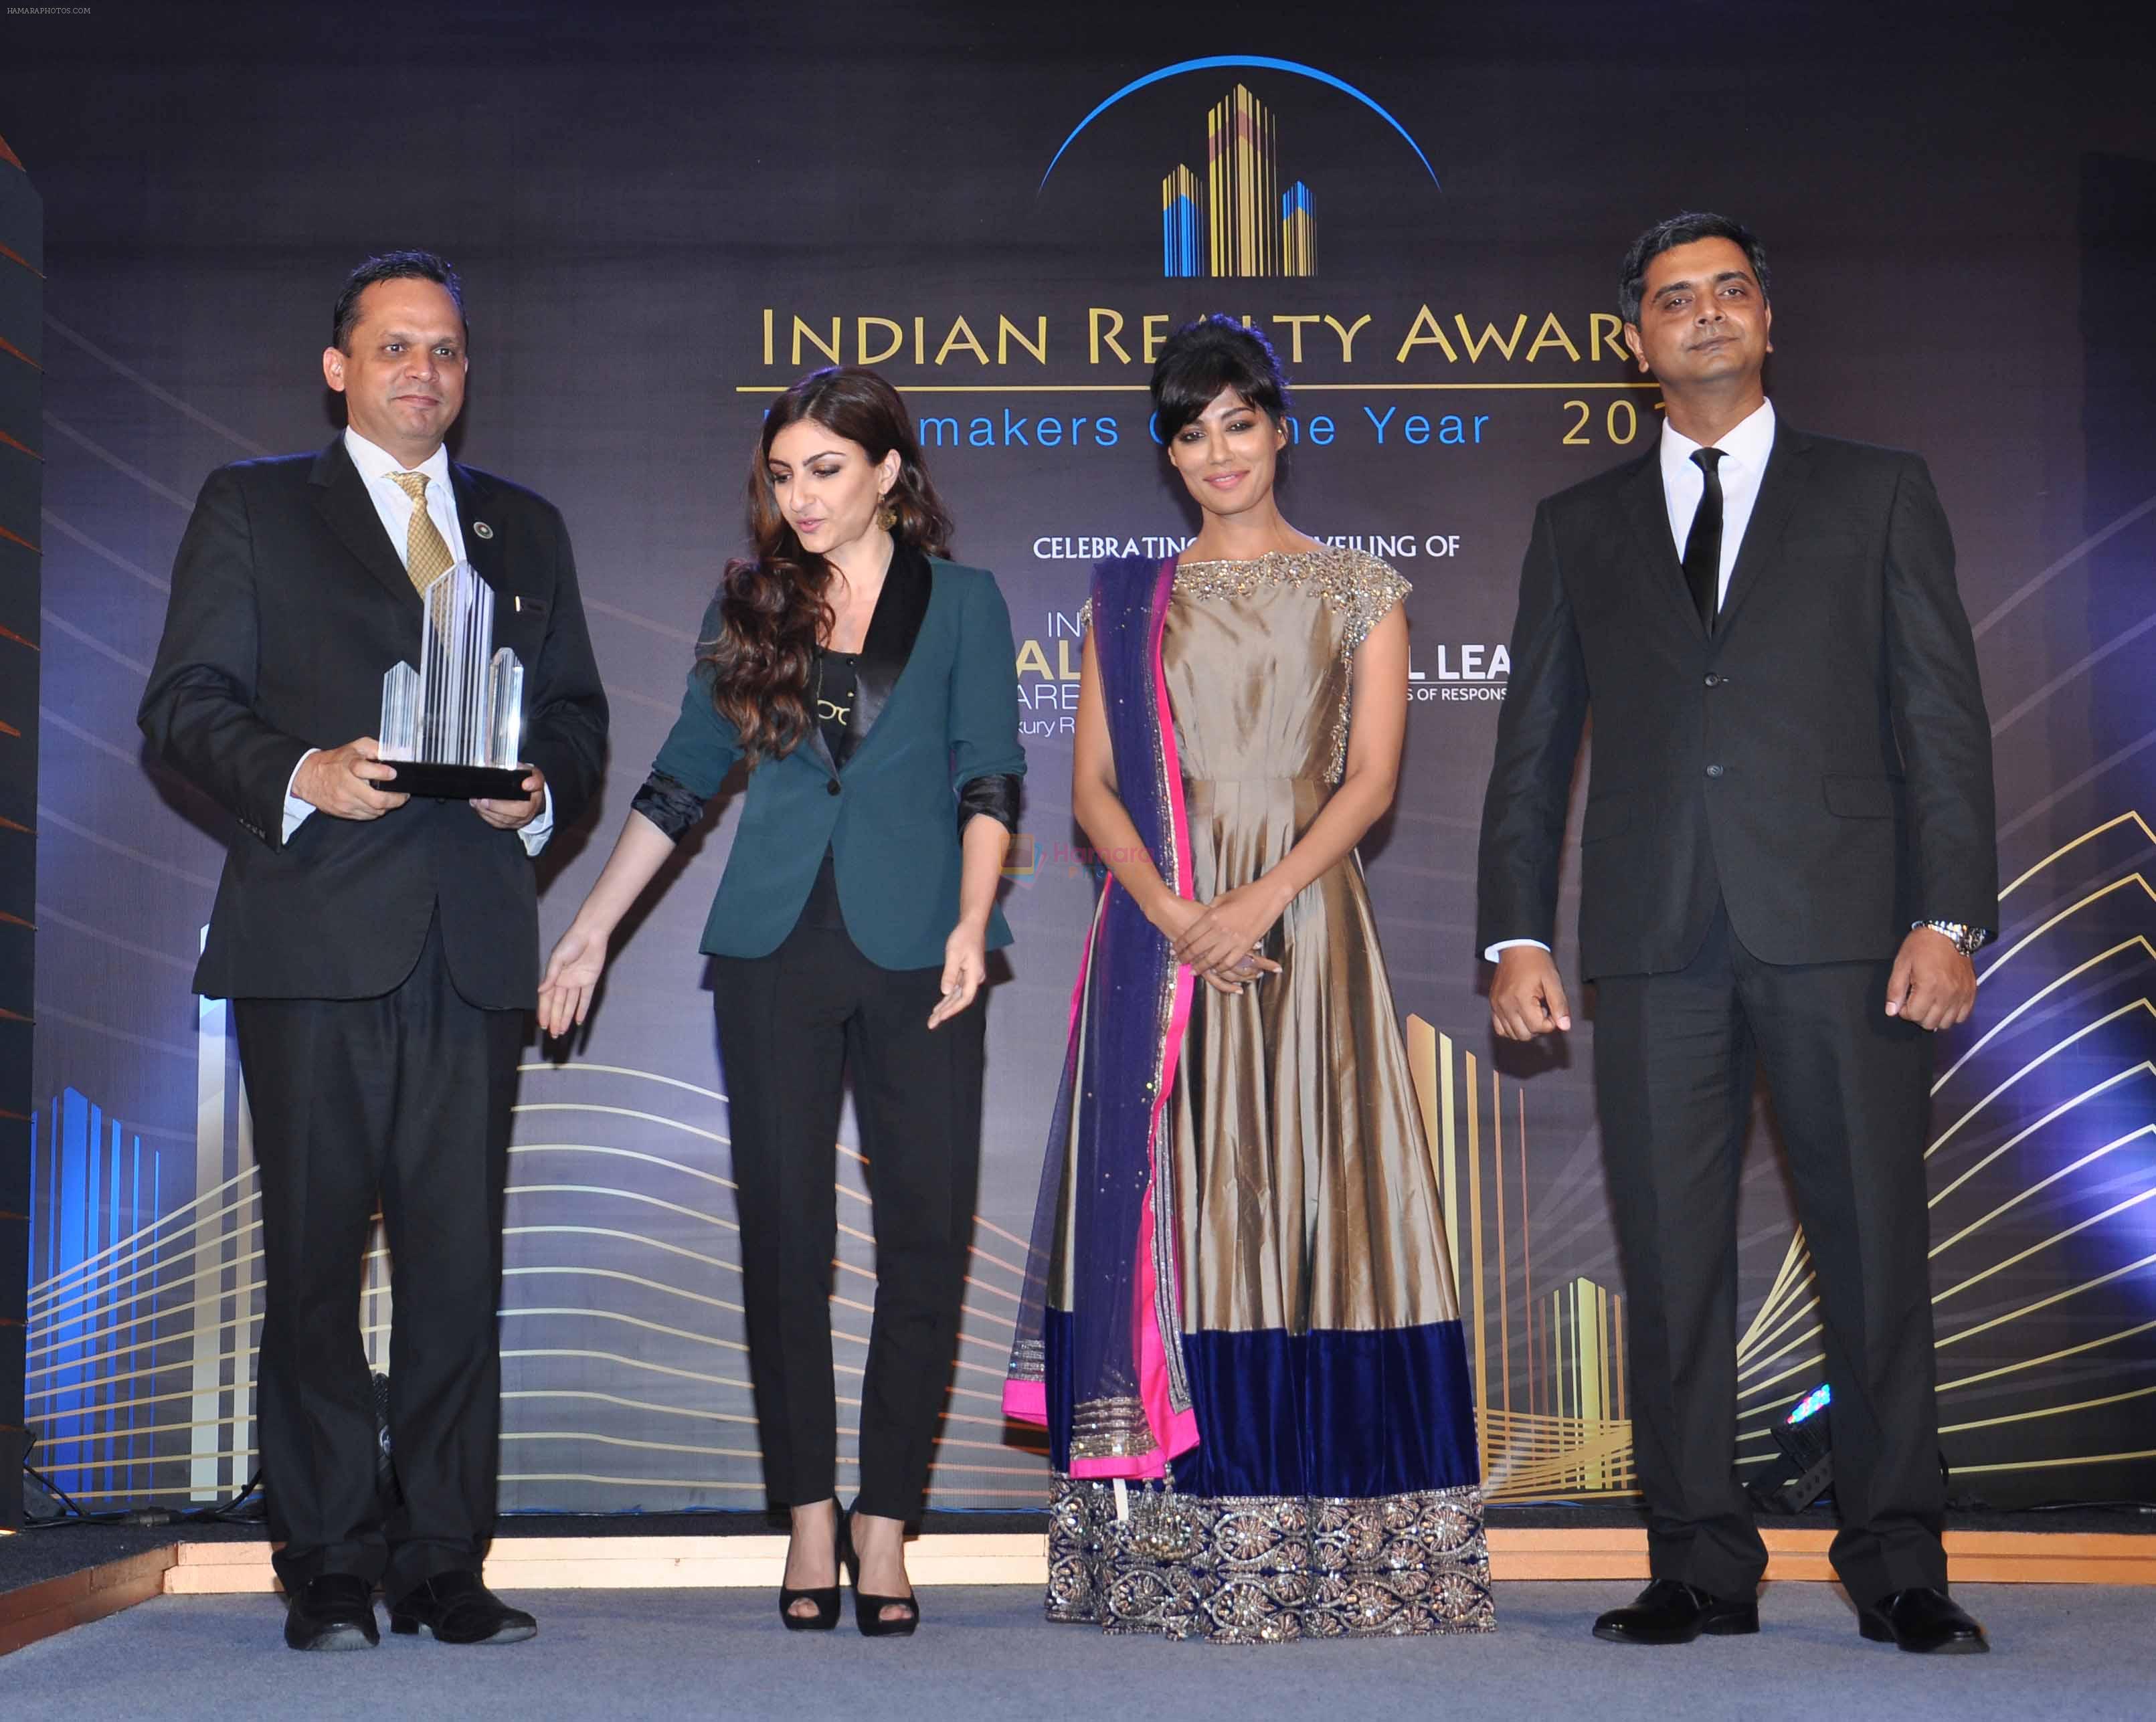 Chitrangada Singh, Soha Ali Khan launch India Realty Yearbook & Real Leaders at The premier Indian Realty Awards 2013 in New Delhi on 8th Oct 2013